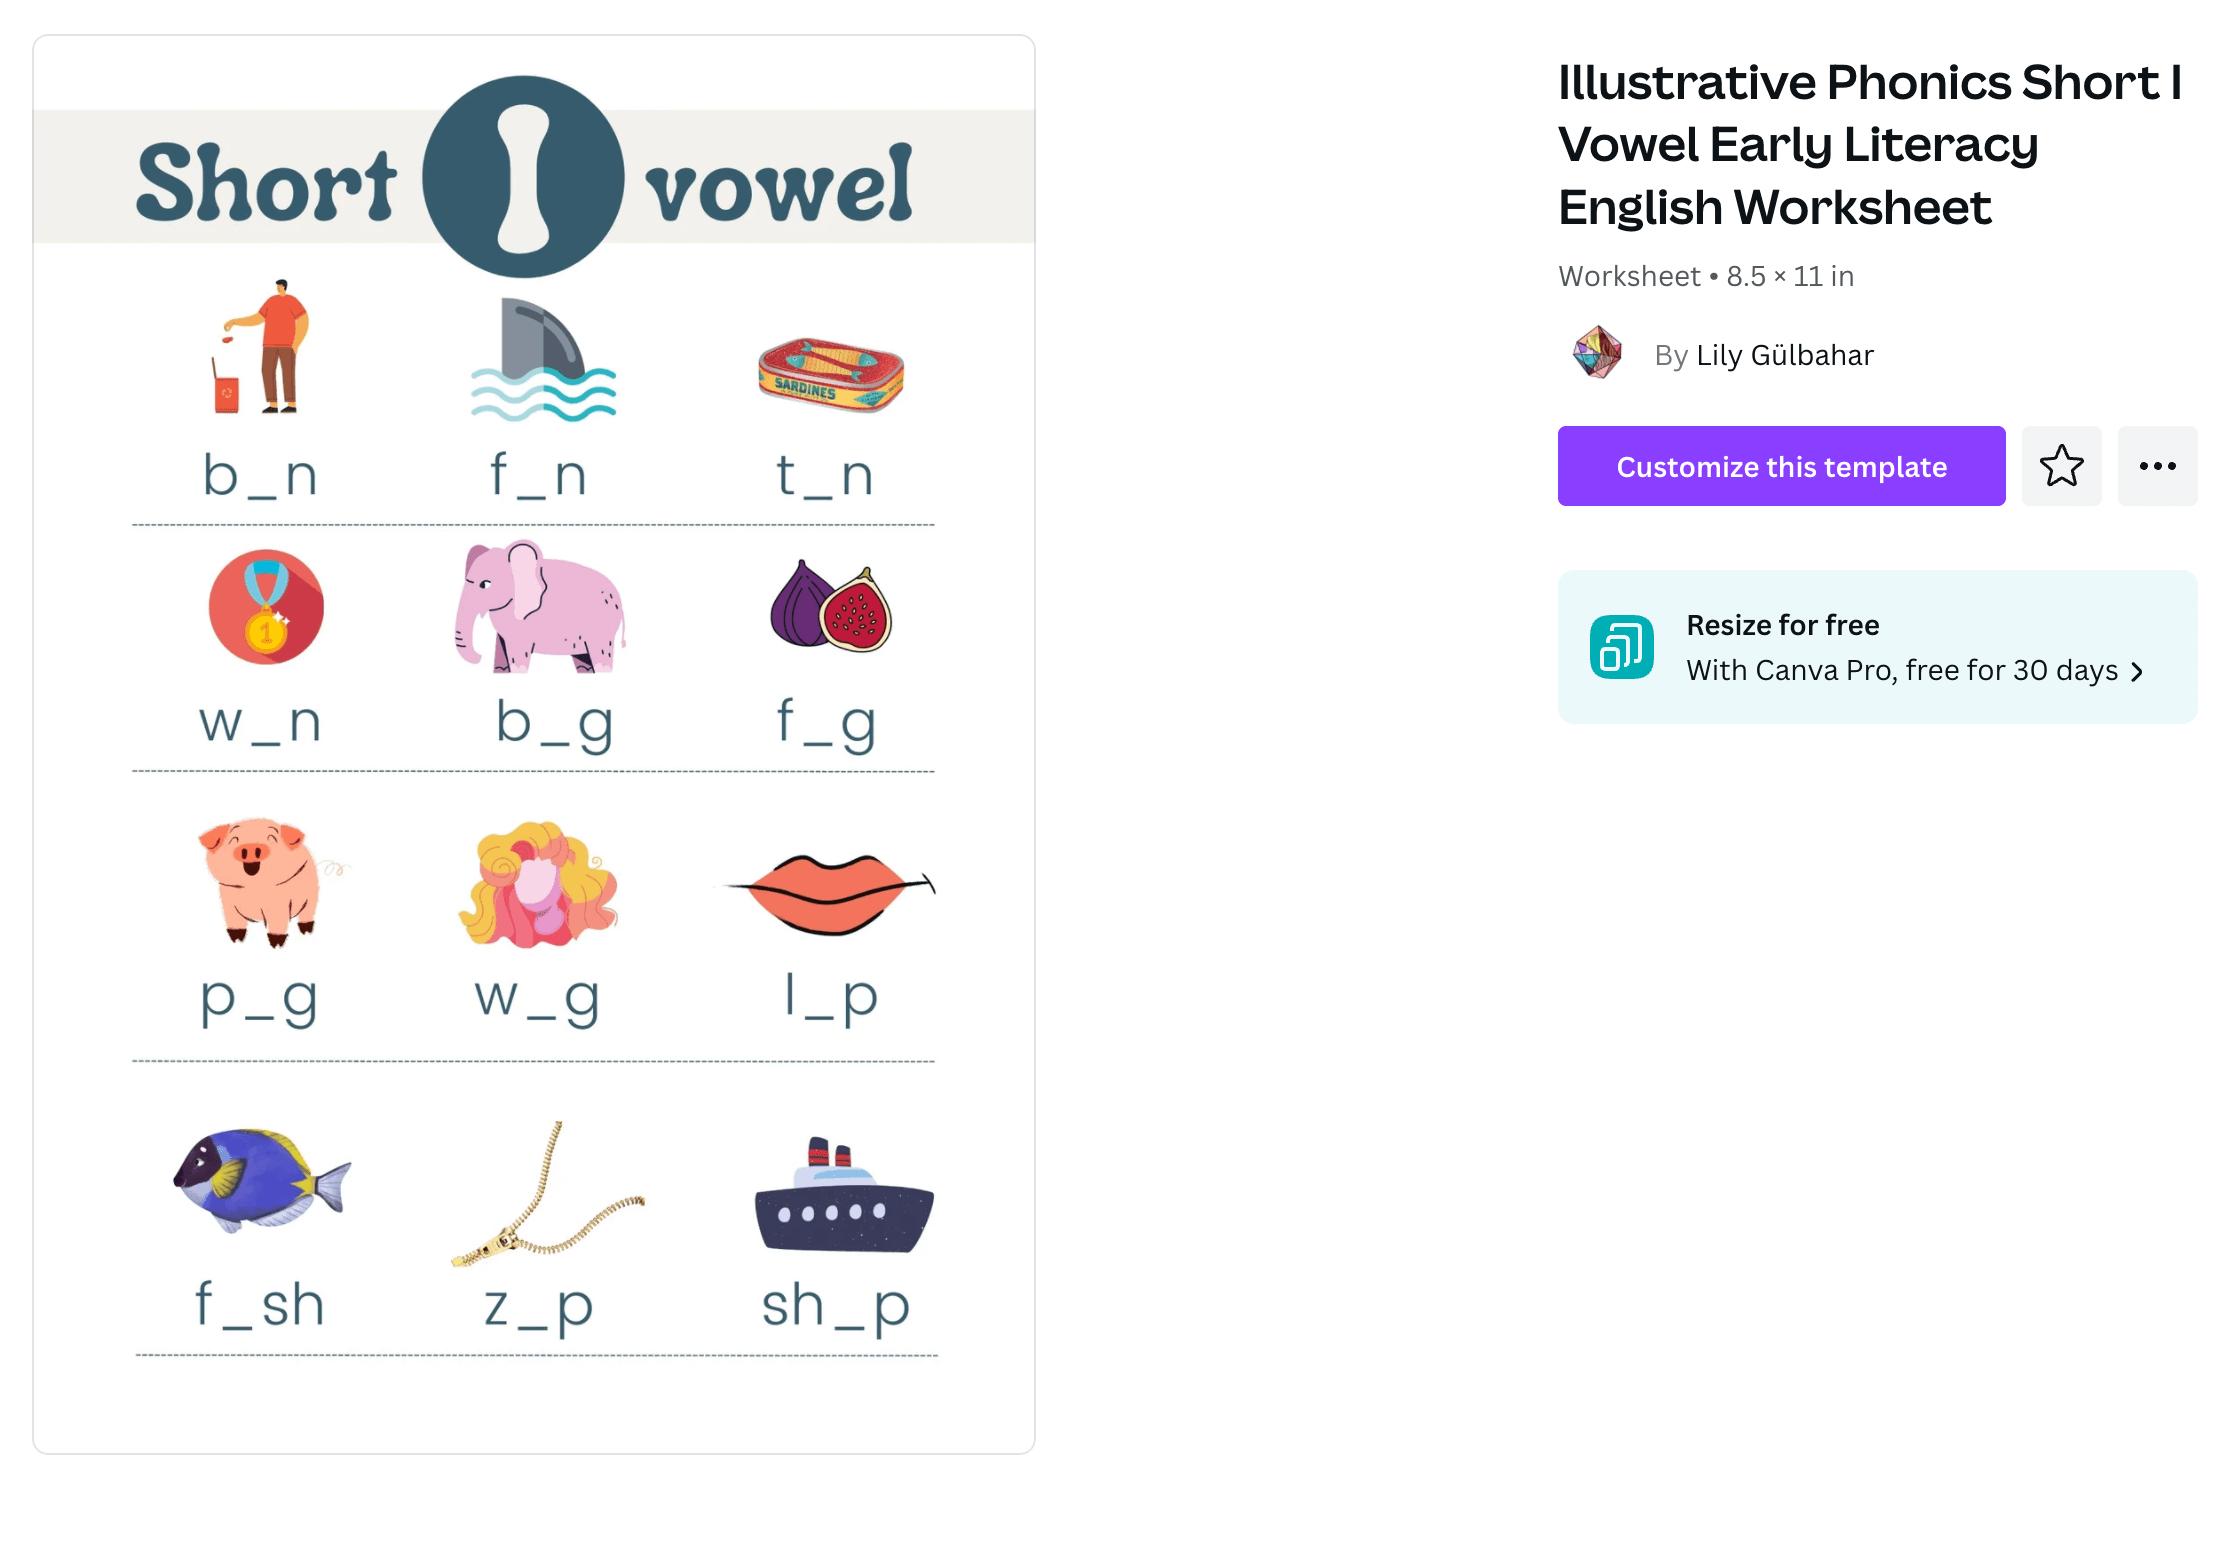 A worksheet for small children about the short I vowel with pictures and clues for words like "bin, fin, tin, win, and big."